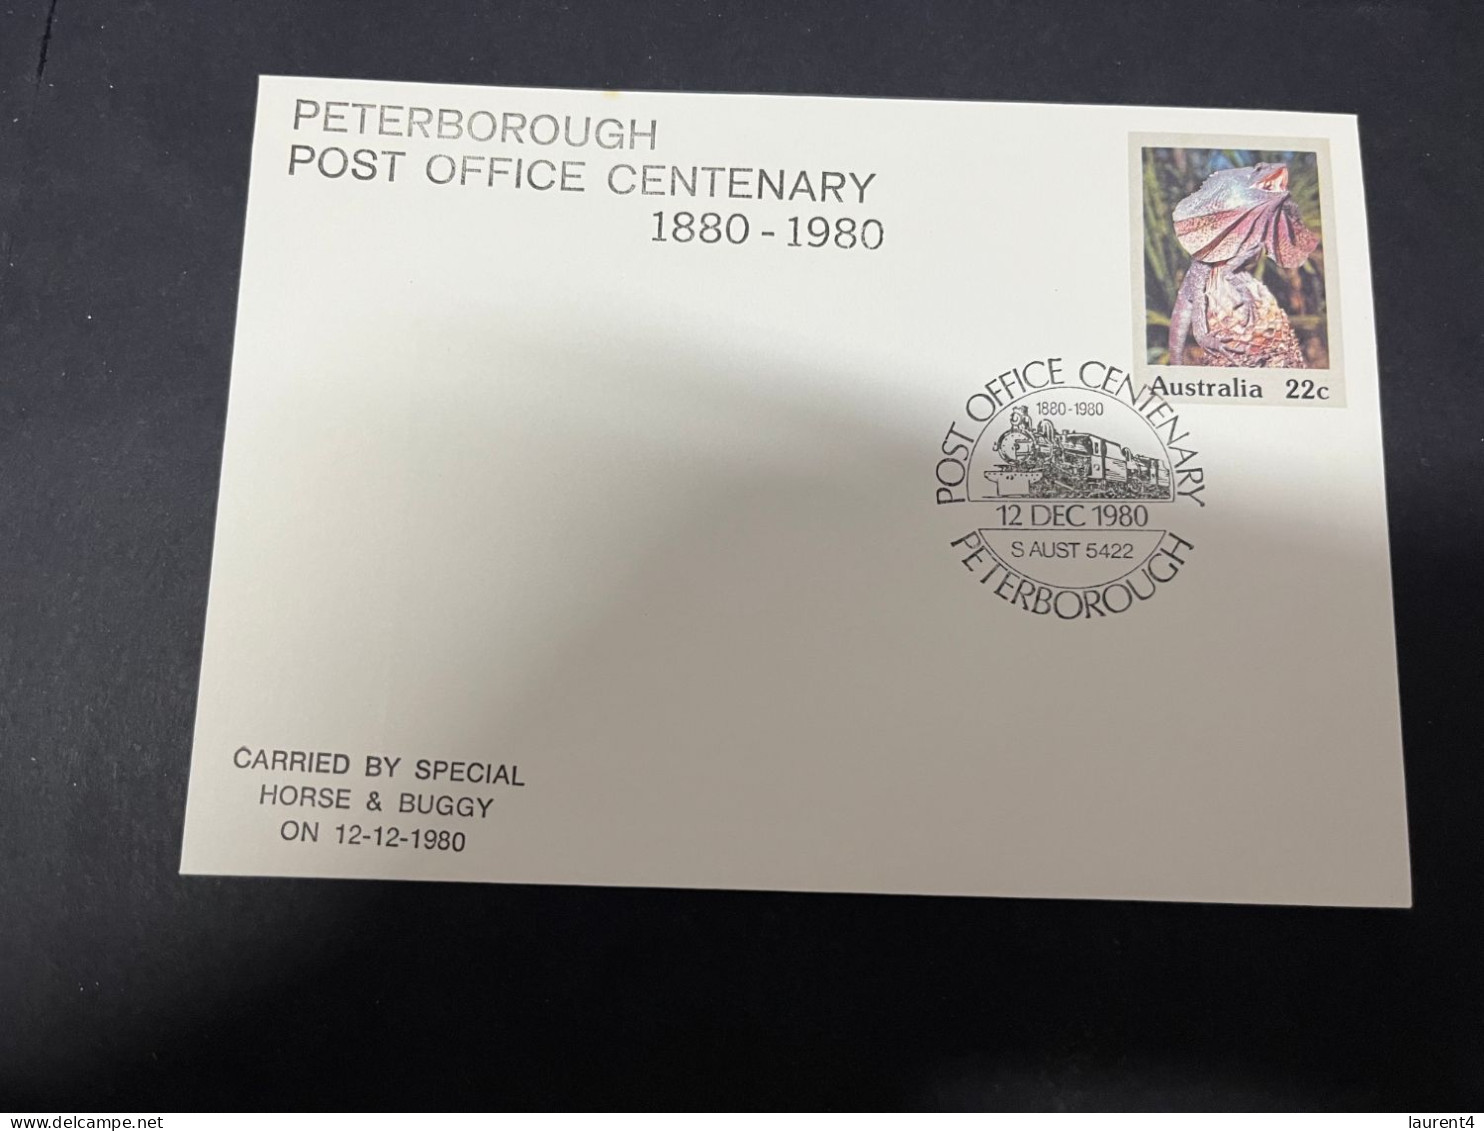 30-4-2023 (3 Z 29) Australia FDC (1 Cover) 1980 - Peterborough Post Office Centenary (Frilled Lizard) - Premiers Jours (FDC)